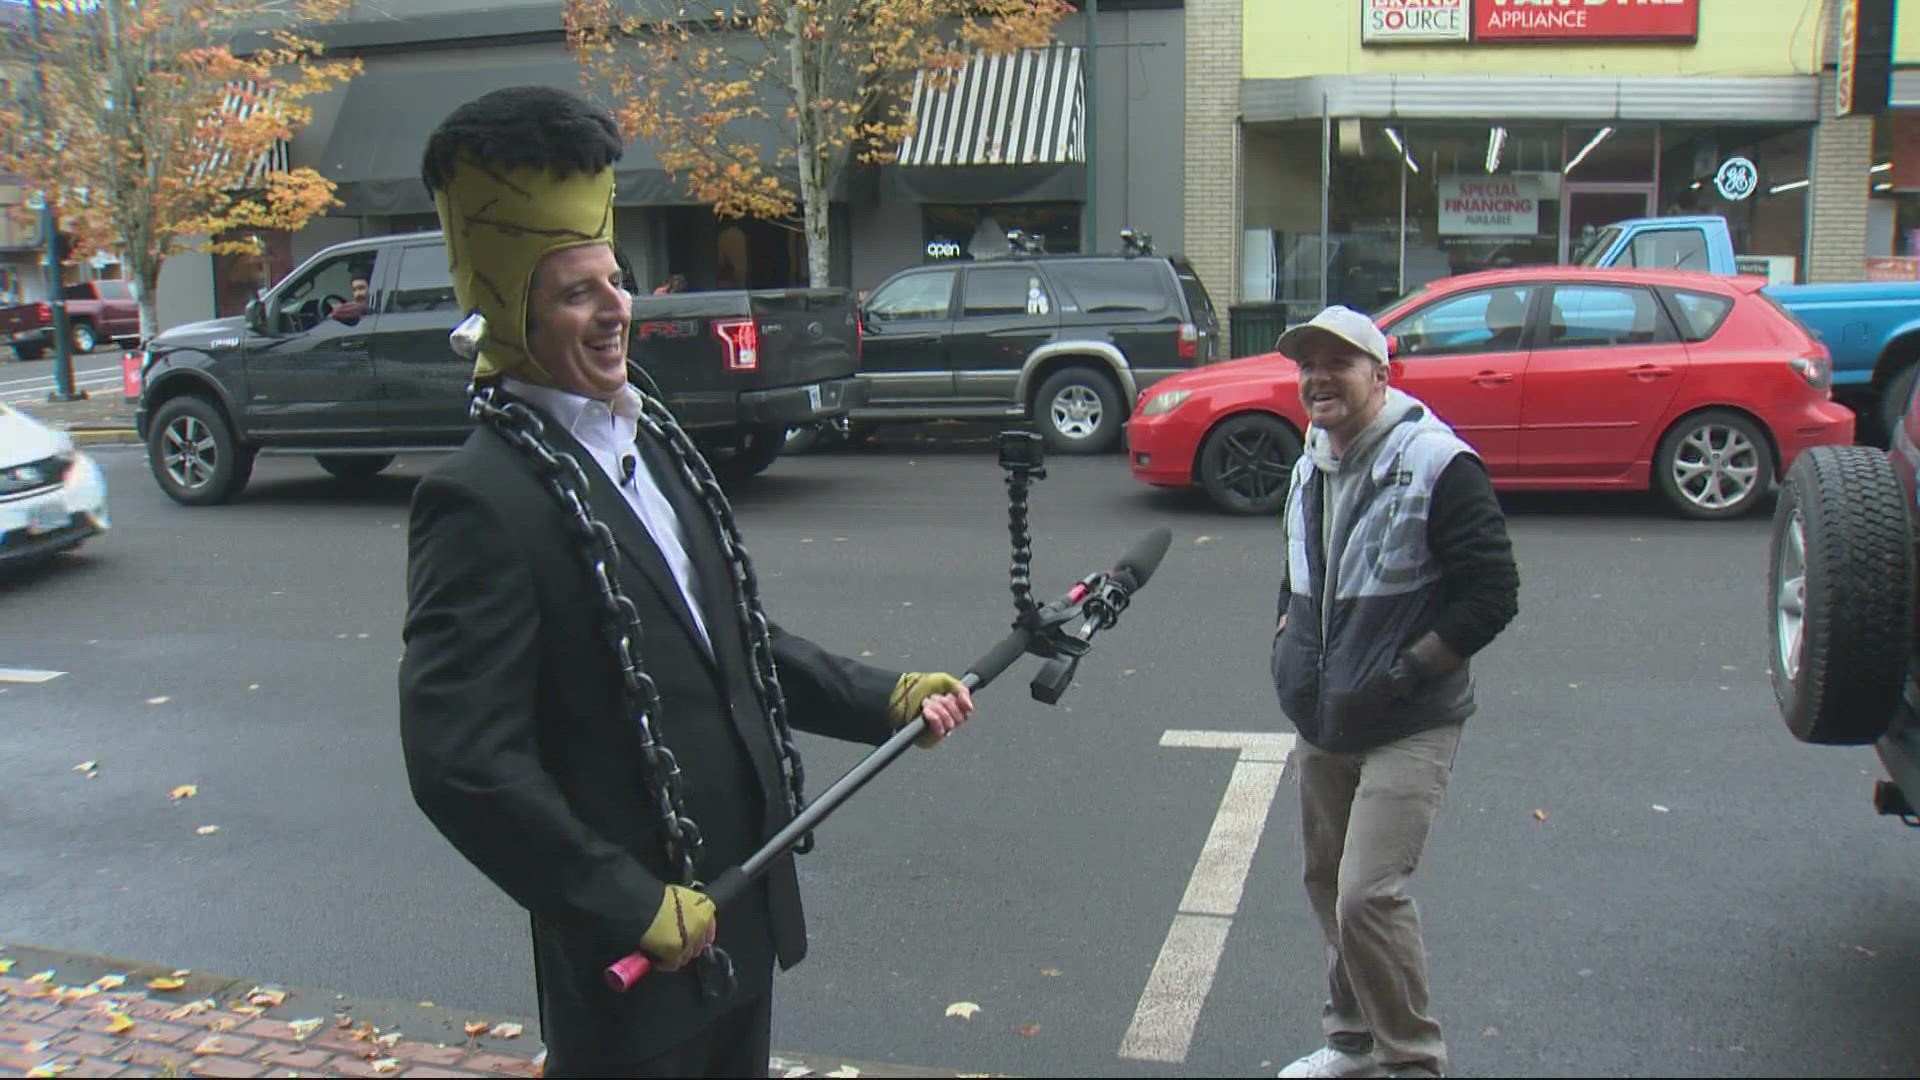 Drew Carney celebrates Halloween in the latest edition of Drew and You. He hit the streets of Forest Grove to ask people all sorts of spooky trivia questions.